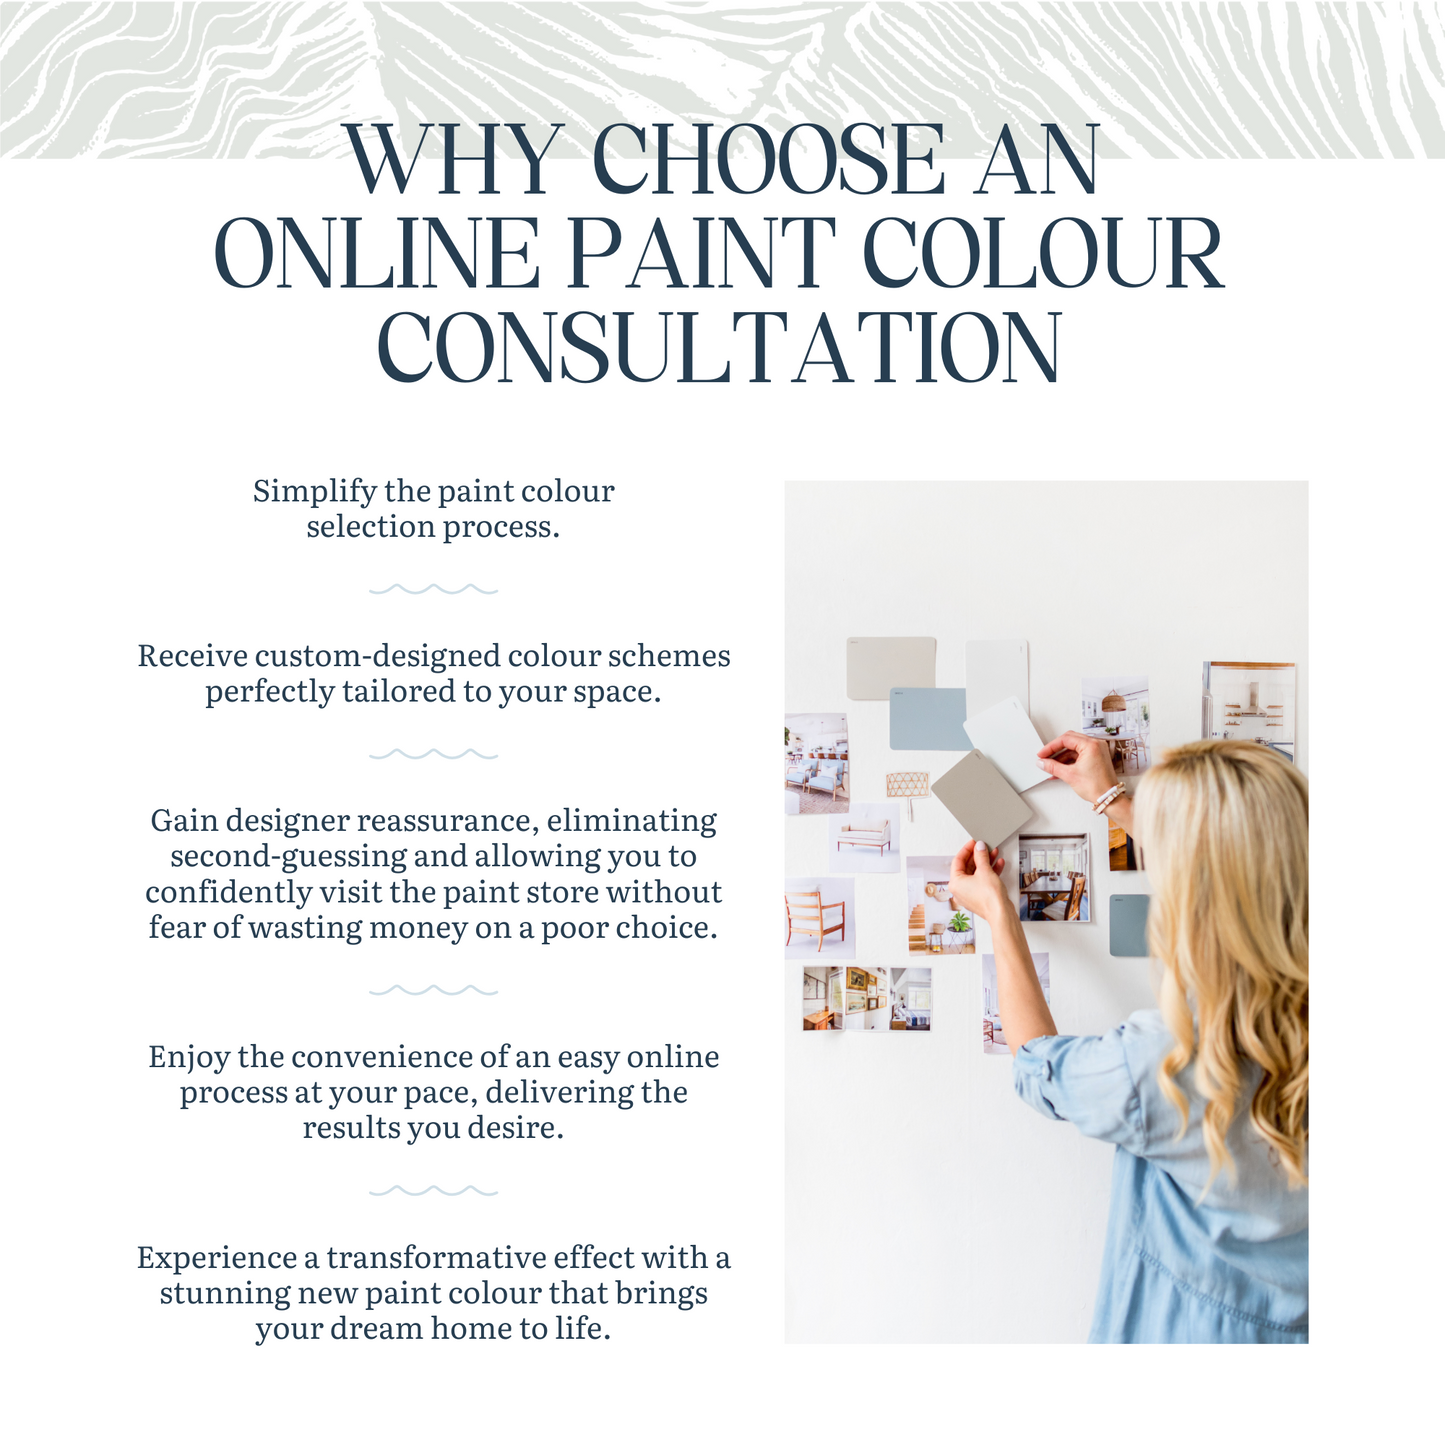 Online Paint Colour Consultation: One or More Rooms